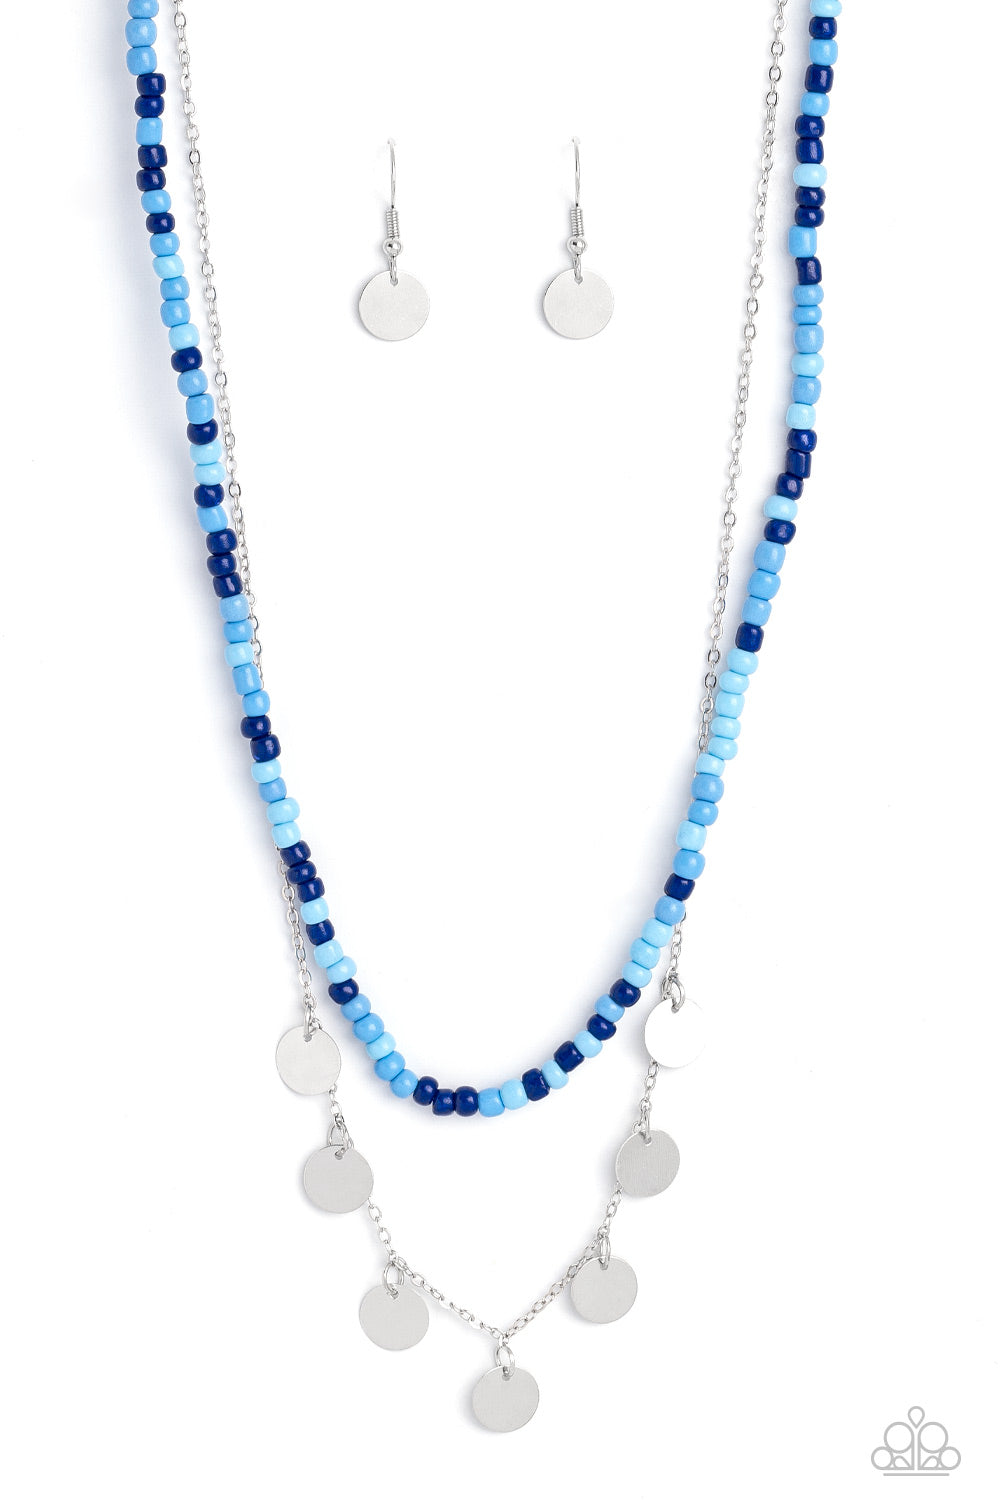 Comet Candy Paparazzi Accessories Necklace with Earrings Blue